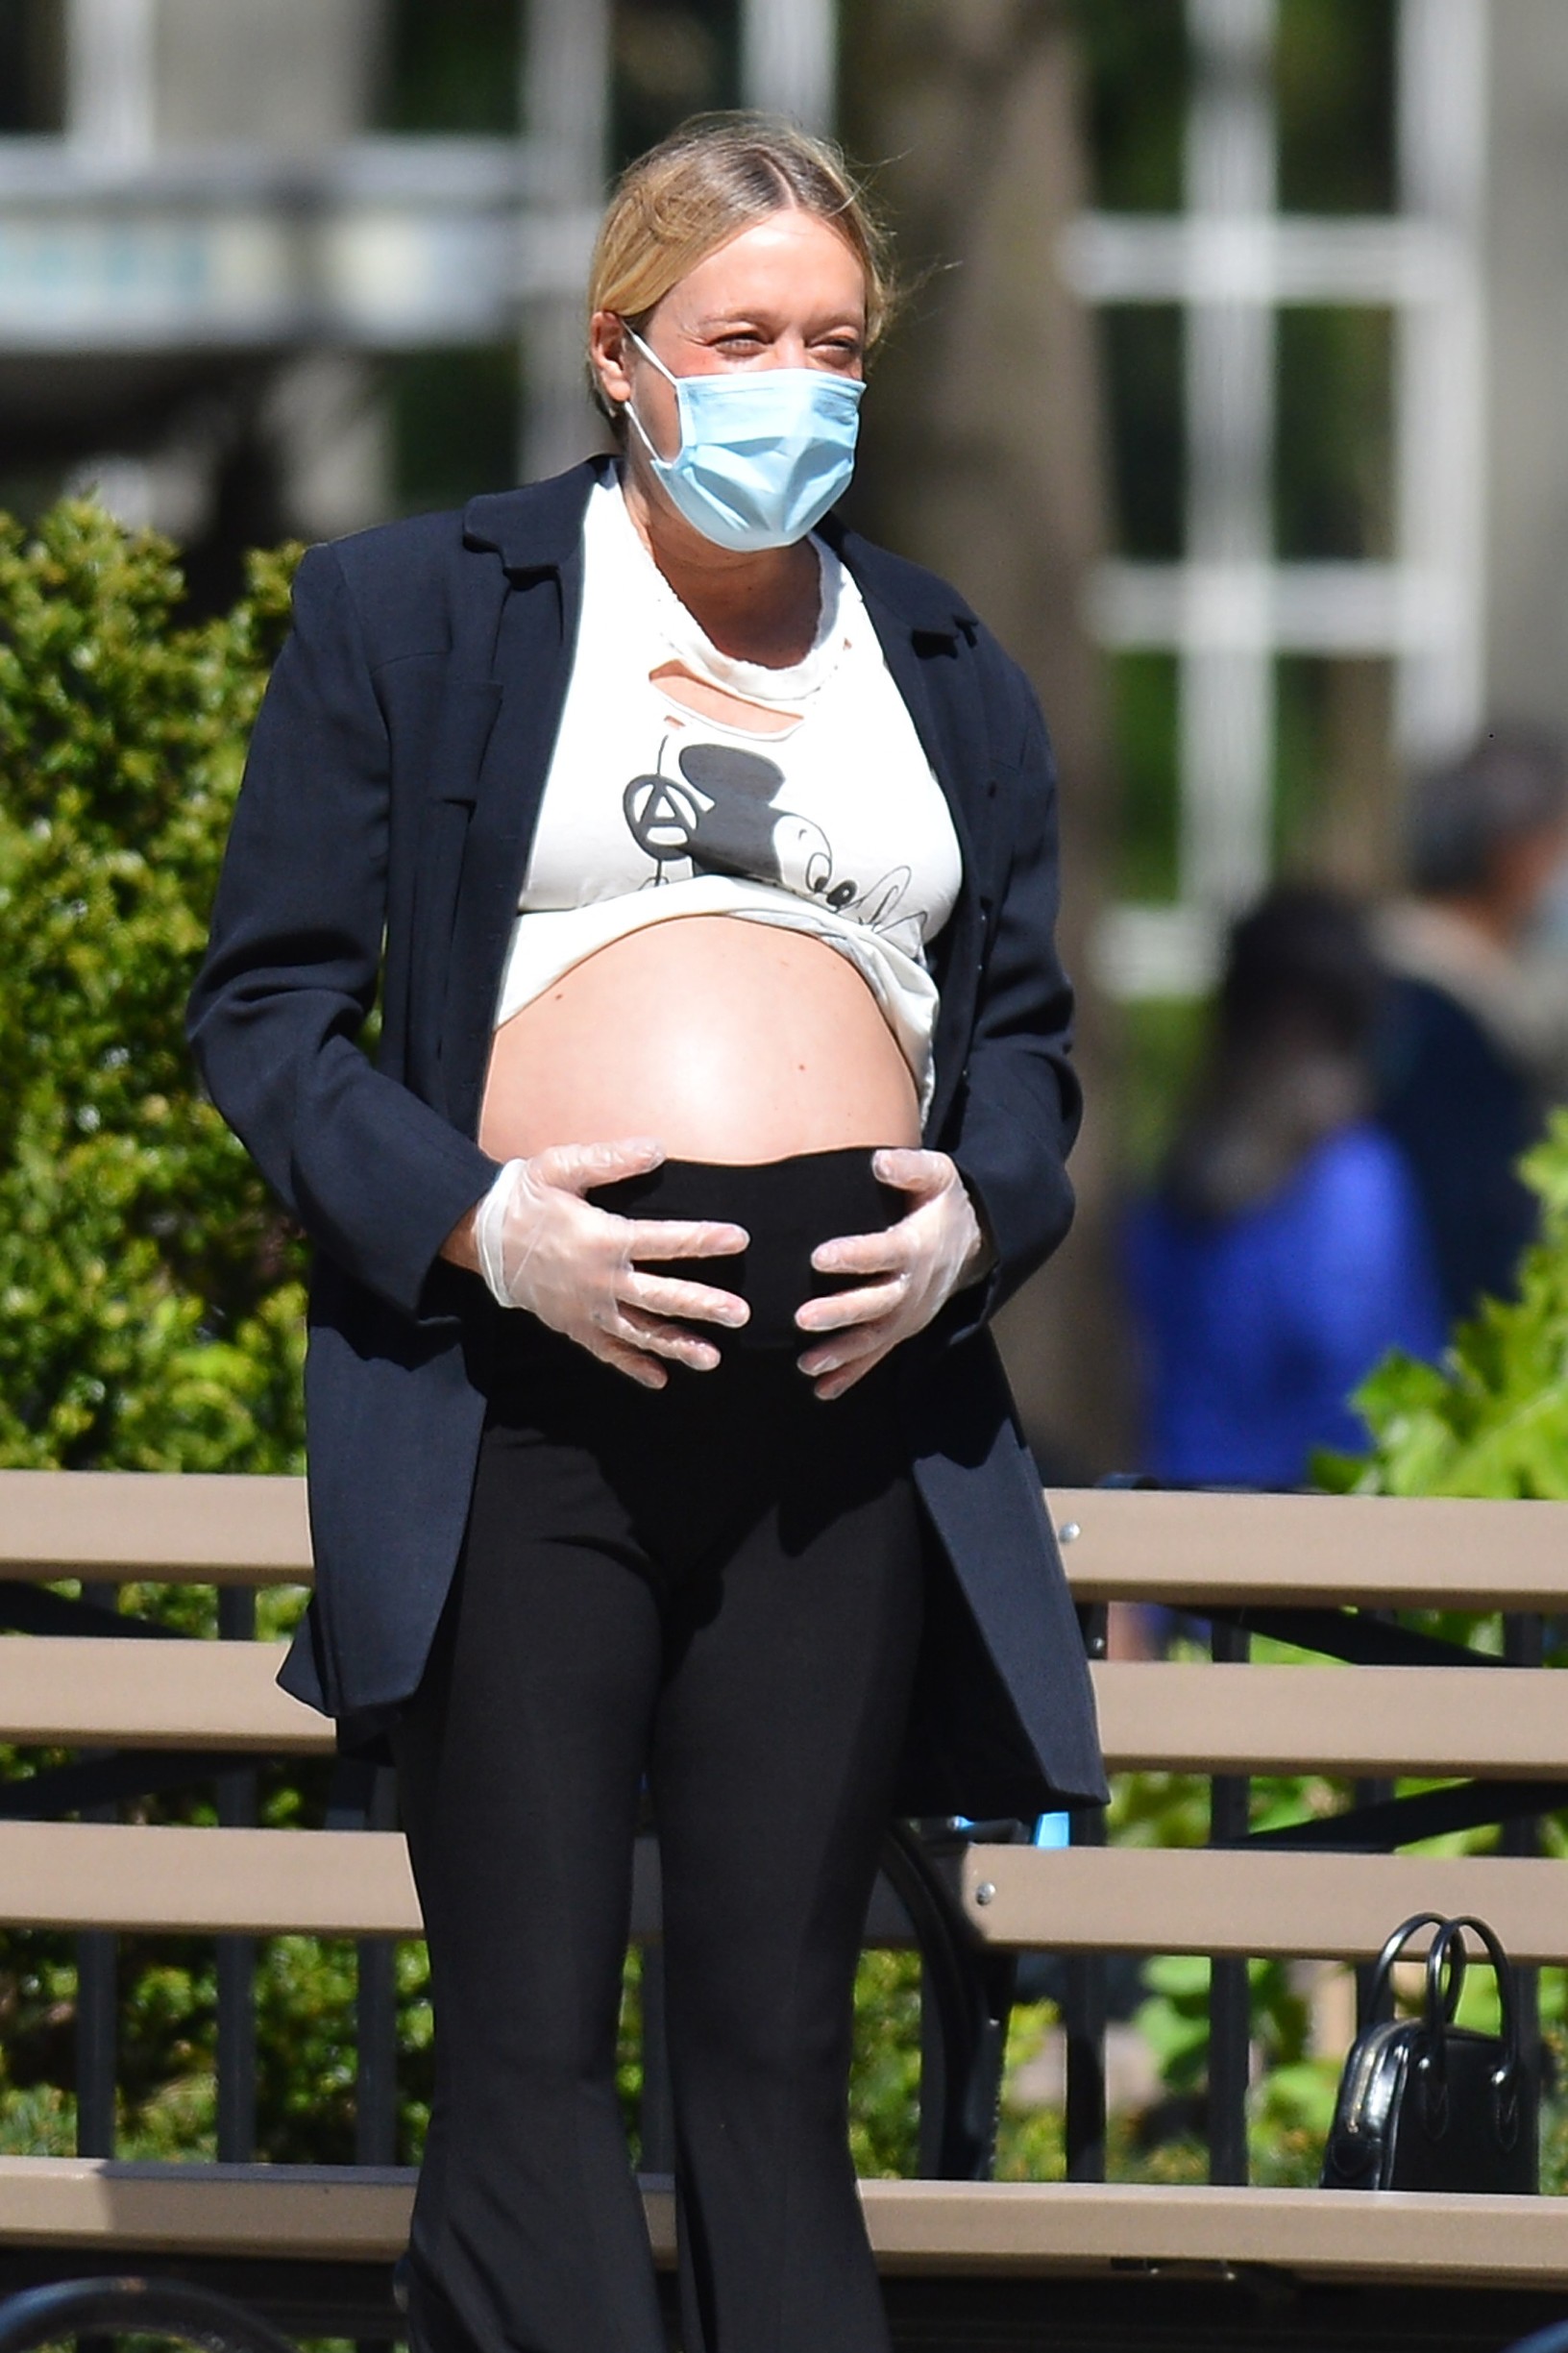 04/28/2020 EXCLUSIVE: Chloe Sevigny shows off her growing baby bump during an outing with boyfriend Sinisa Mackovic in New York City. The 45 year old actress wore a face mask, rubber gloves, black blazer, vintage t-shirt, bell bottoms, and black boots., Image: 515953594, License: Rights-managed, Restrictions: Exclusive NO usage without agreed price and terms. Please contact sales@theimagedirect.com, Model Release: no, Credit line: TheImageDirect.com / The Image Direct / Profimedia